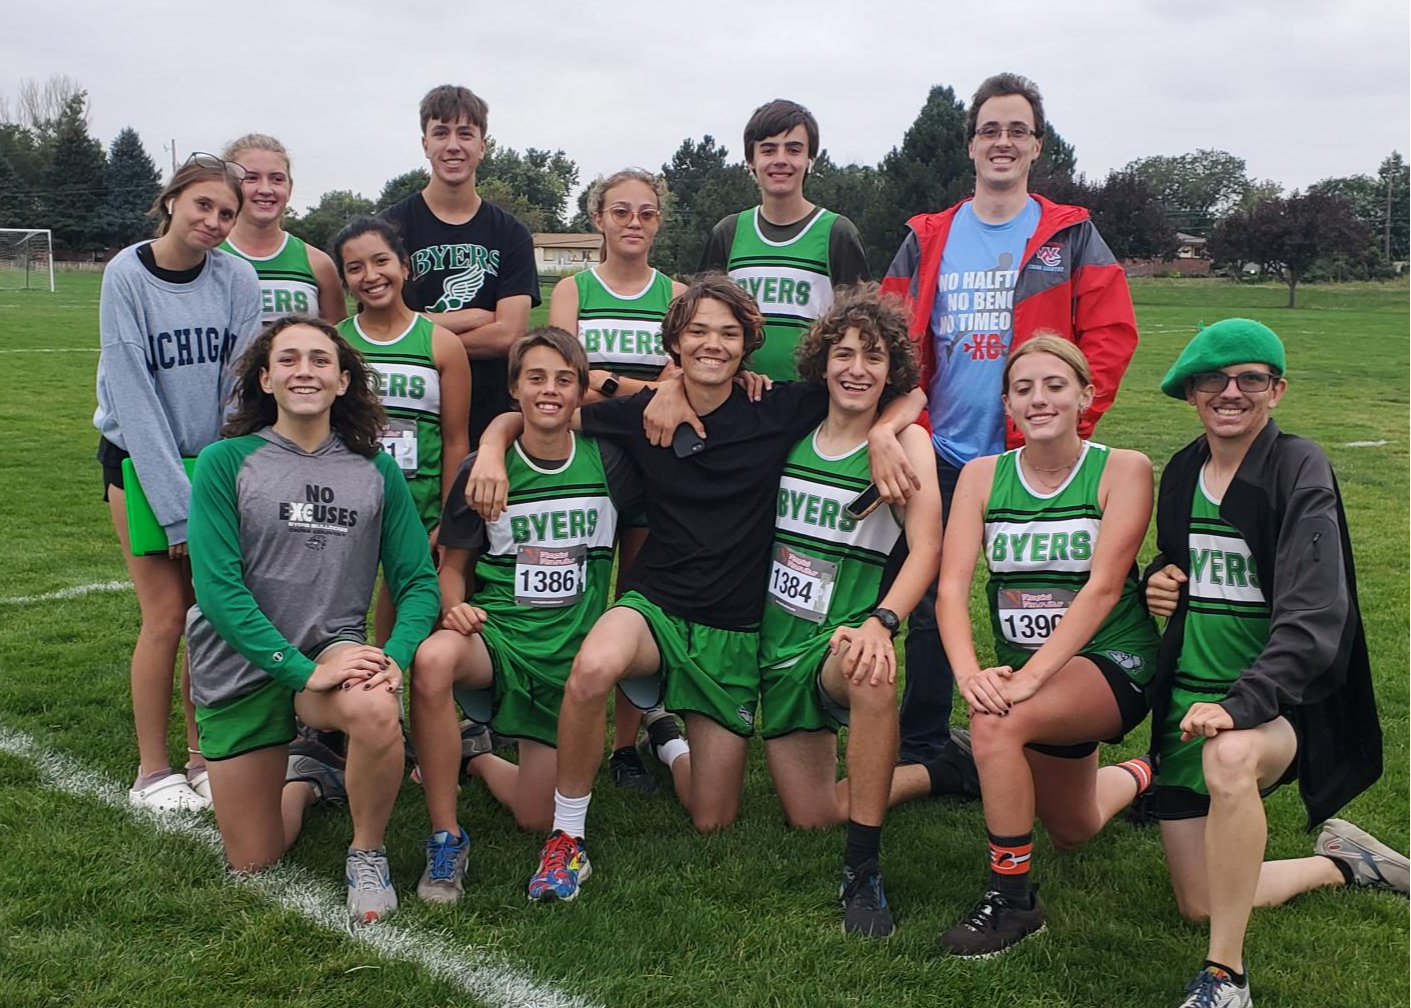 Cross Country team picture at a meet along with an old coach Mr. Moahoney.